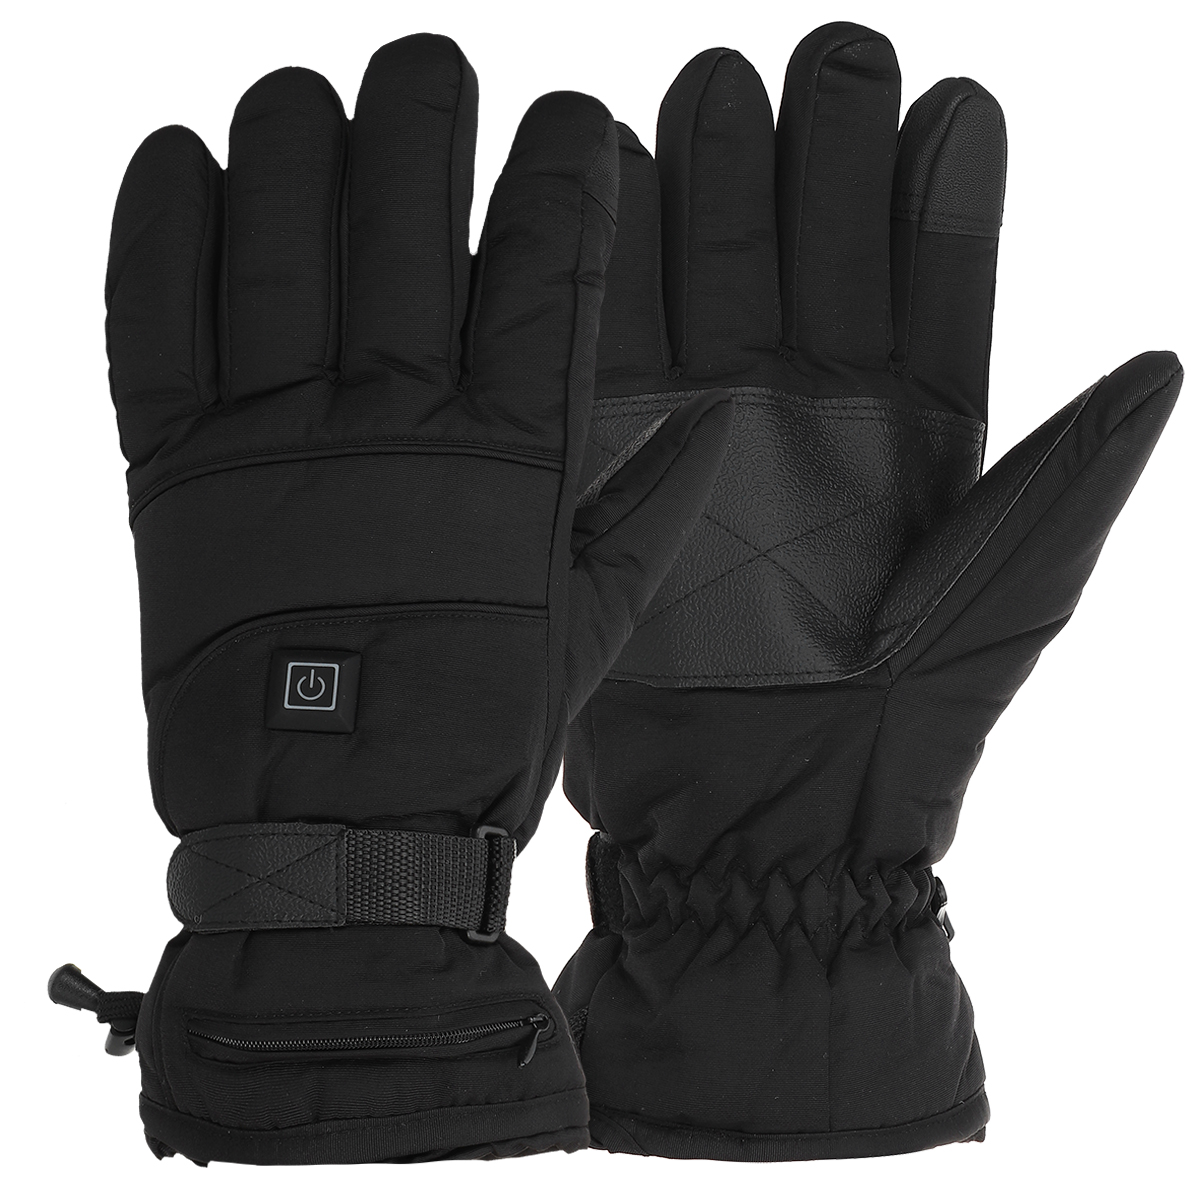 1-Pair-Electric-Heated-Hand-Gloves-3-Modes-Touchscreen-Motorbike-Motorcycle-Winter-Warm-Heated-Batte-1756429-10